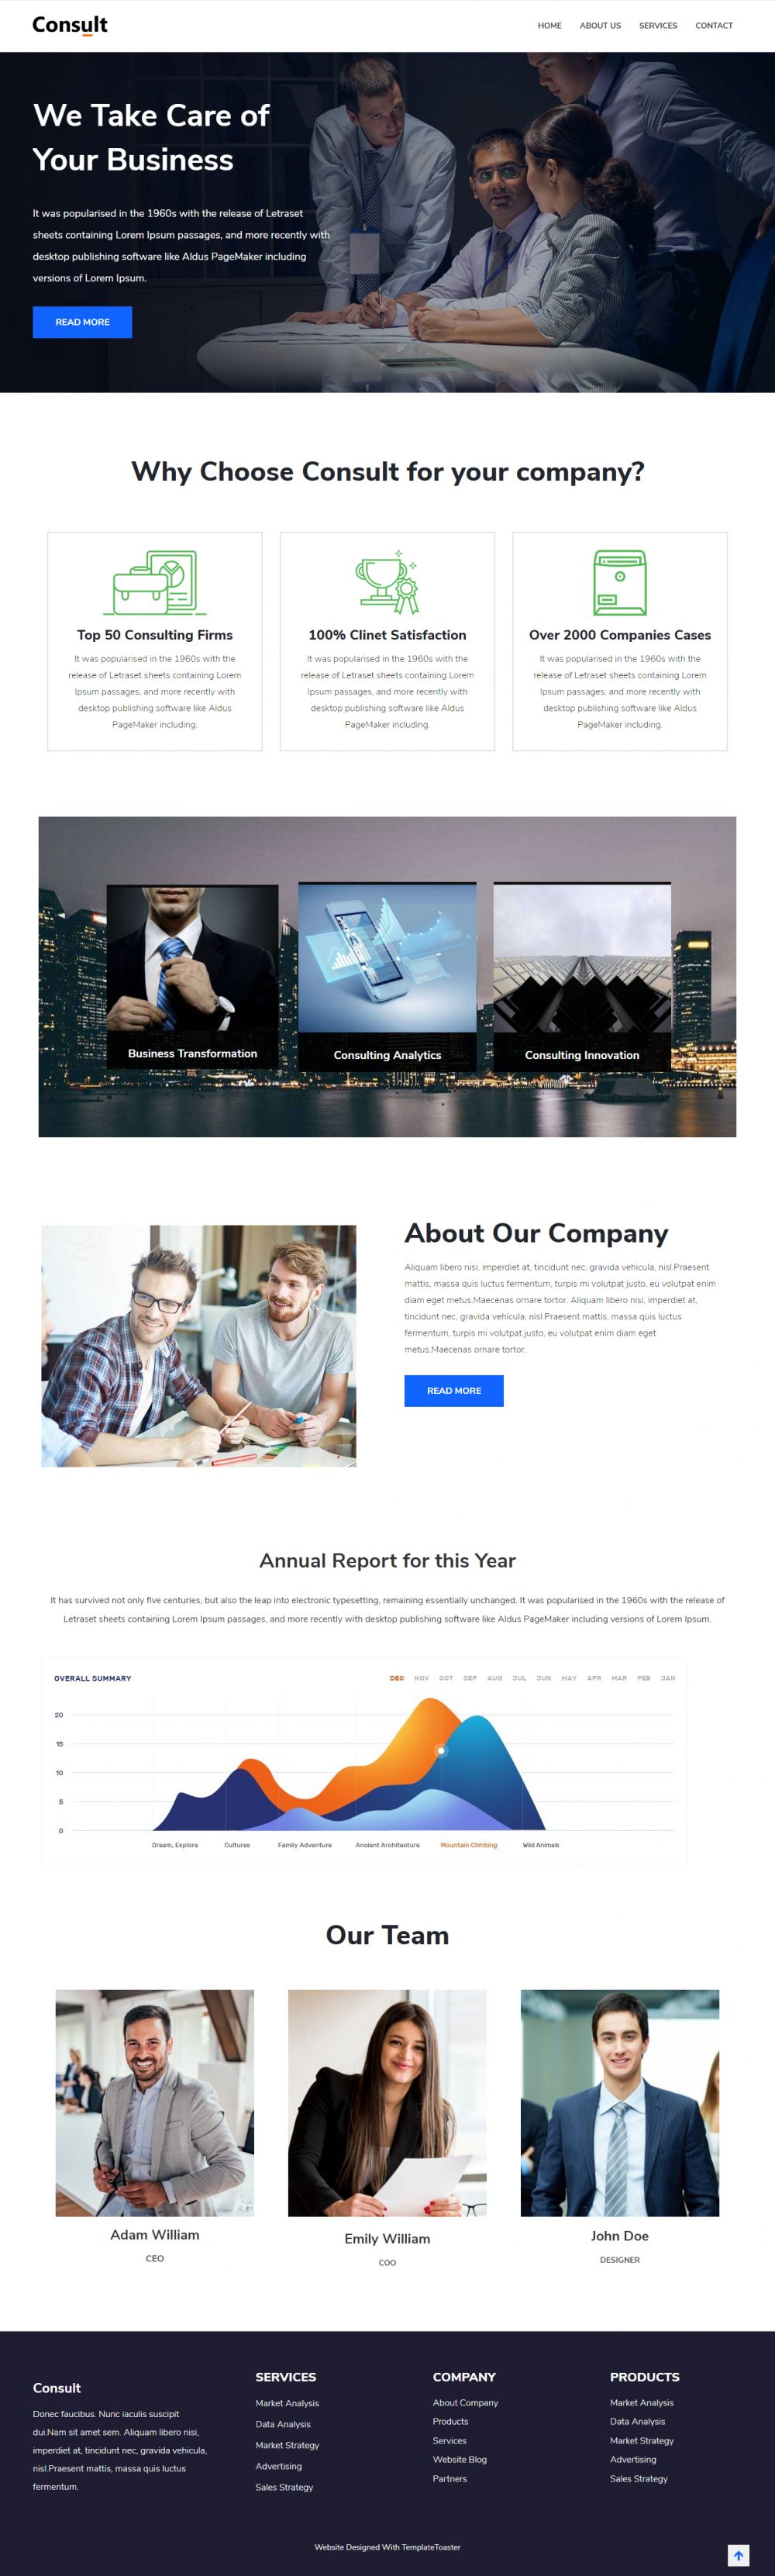 Consult-Business-Consulting-Template